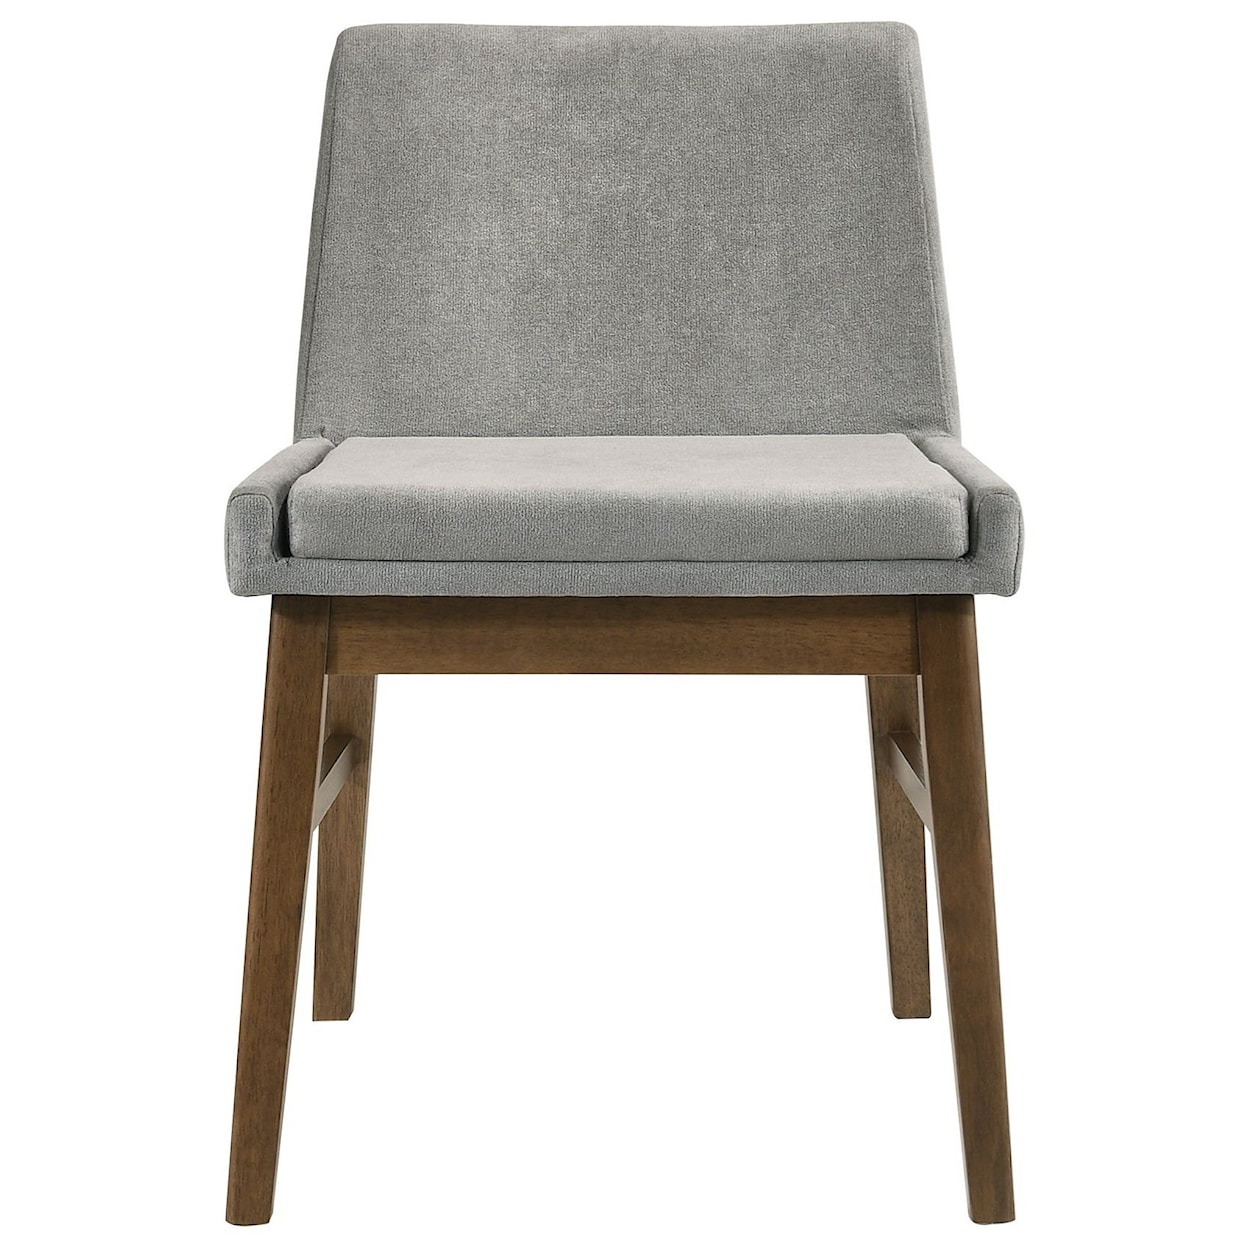 Elements International Weston Upholstered Side Chair